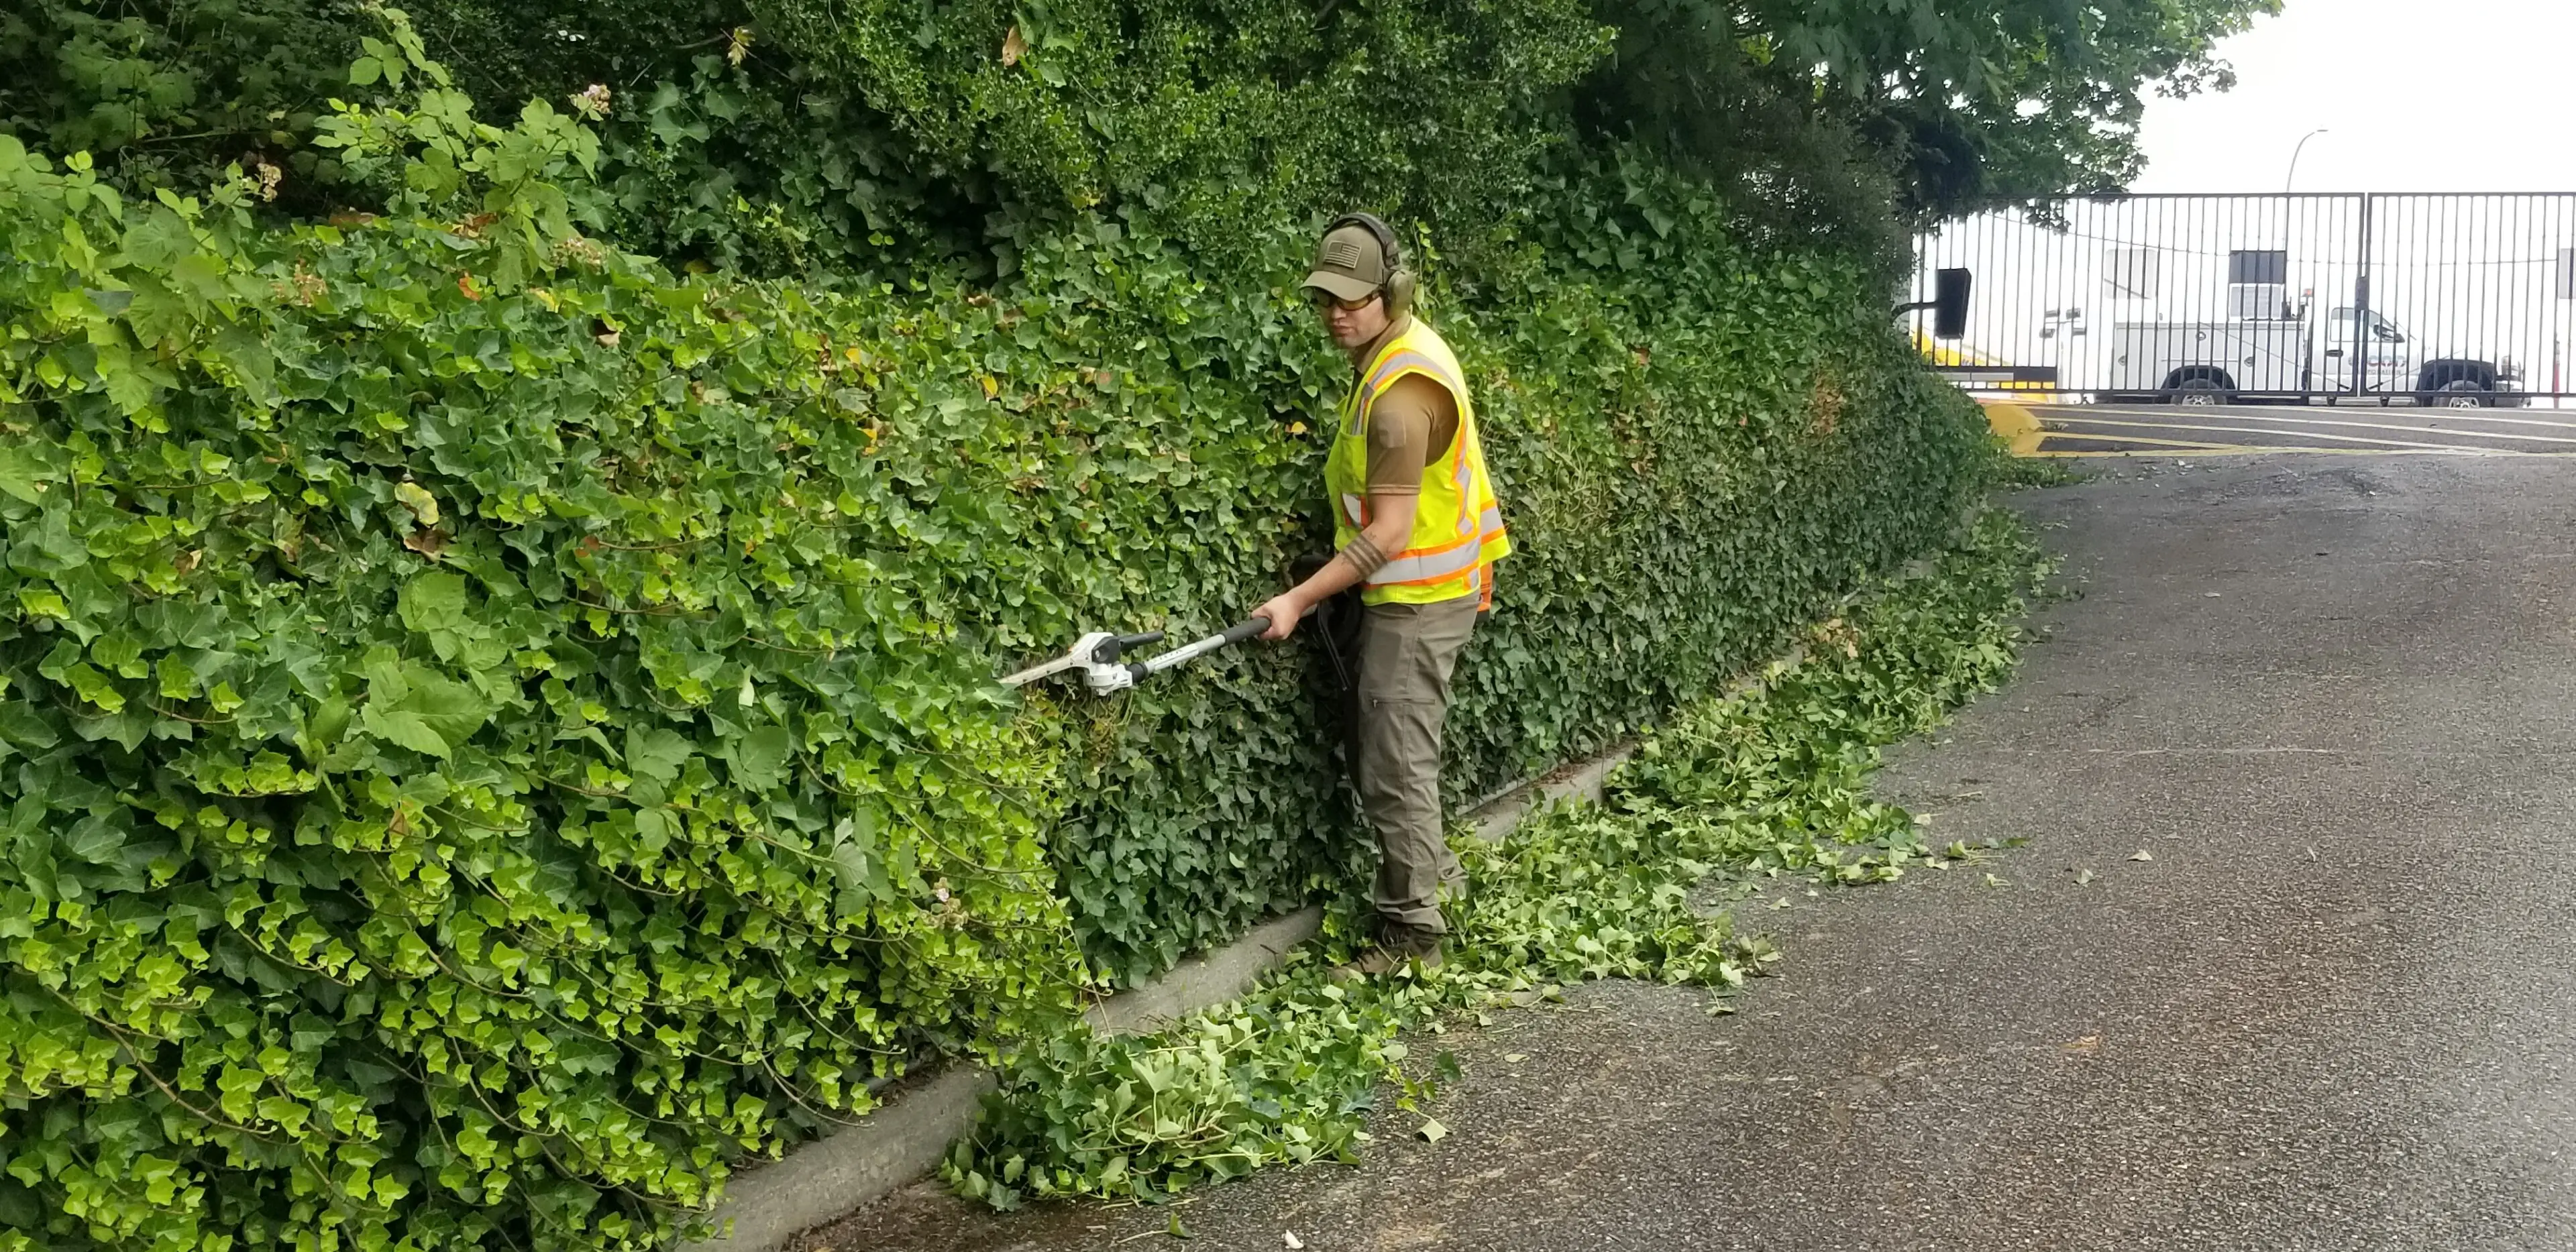 A man is trimming the hedge with an electric shears.